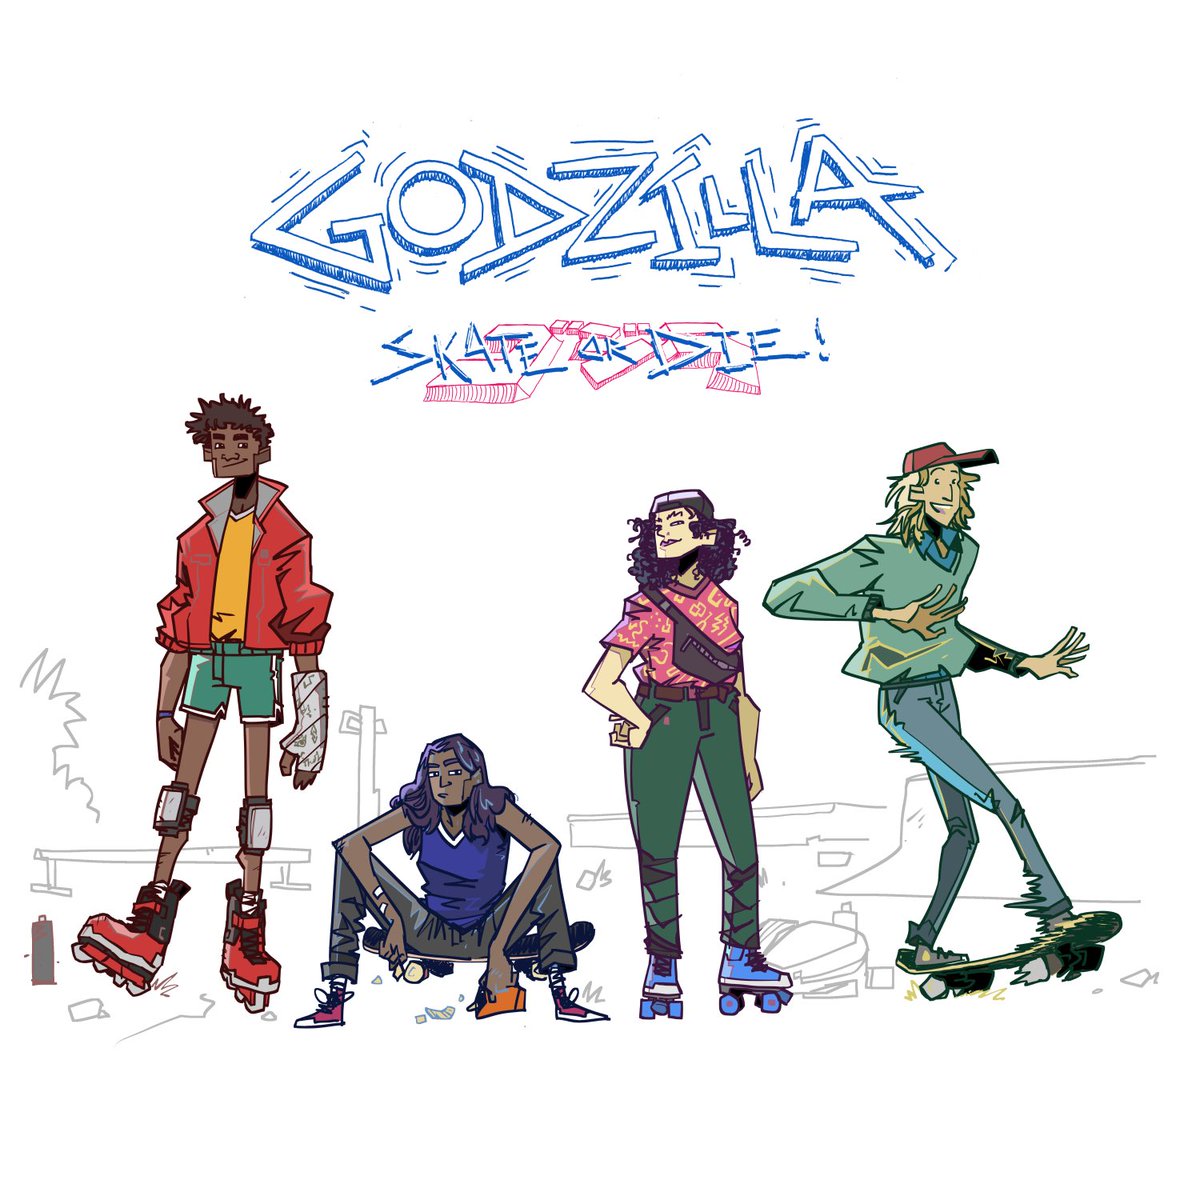 Meet the (non Kaiju) cast of #GodzillaSkateorDie! Jimmy, Sushi, Jules and Rolly. The Coin Toss Crew! Issue 1 drops June 12th and FOC is this Sunday so let ya local comic store know you want a copy and pls help spread the word! 🦖🛼🛹🛼🛹🦖 #comics #godzilla #skating #read